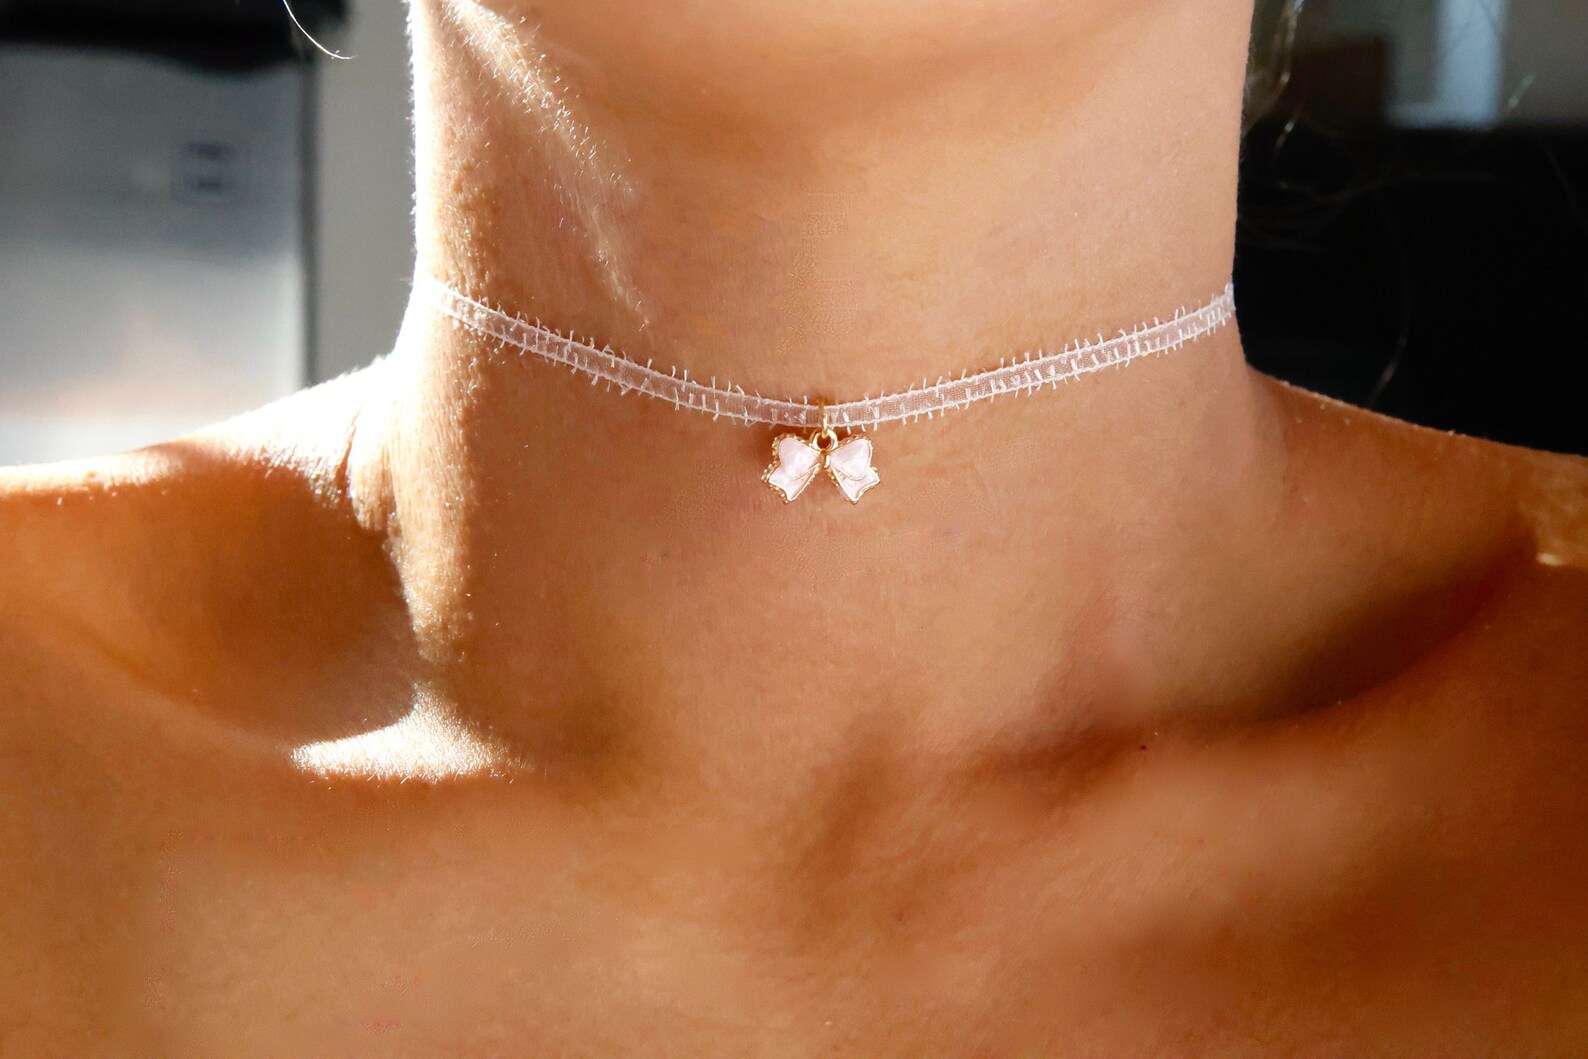 10 Unbelievably Cute Chokers You Need to Try